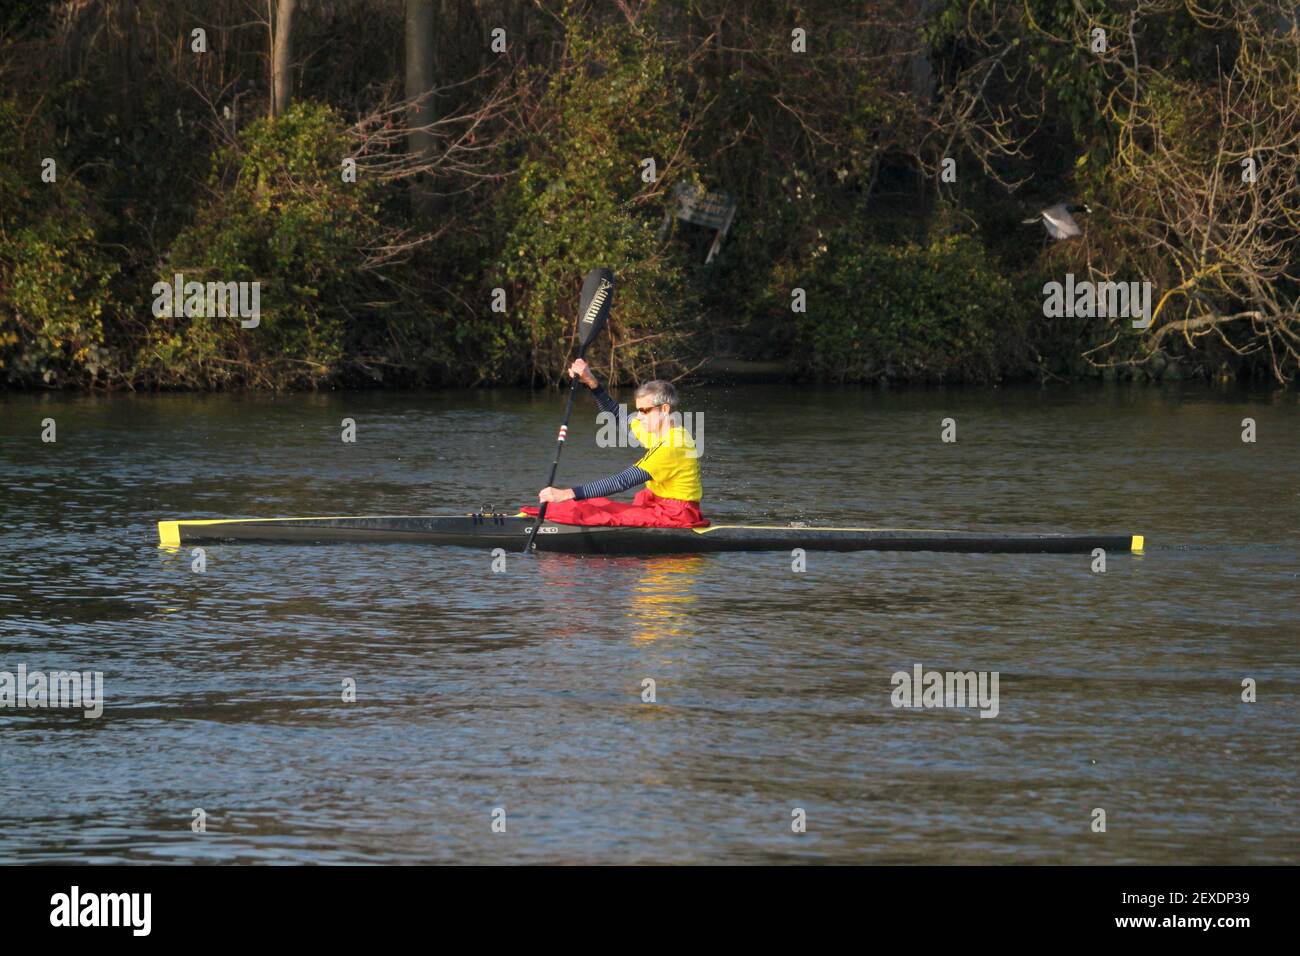 Canoeing on the River Thames, Sadlers Ride, Hurst Park, East Molesey, Surrey, England, Great Britain, UK, Europe Stock Photo